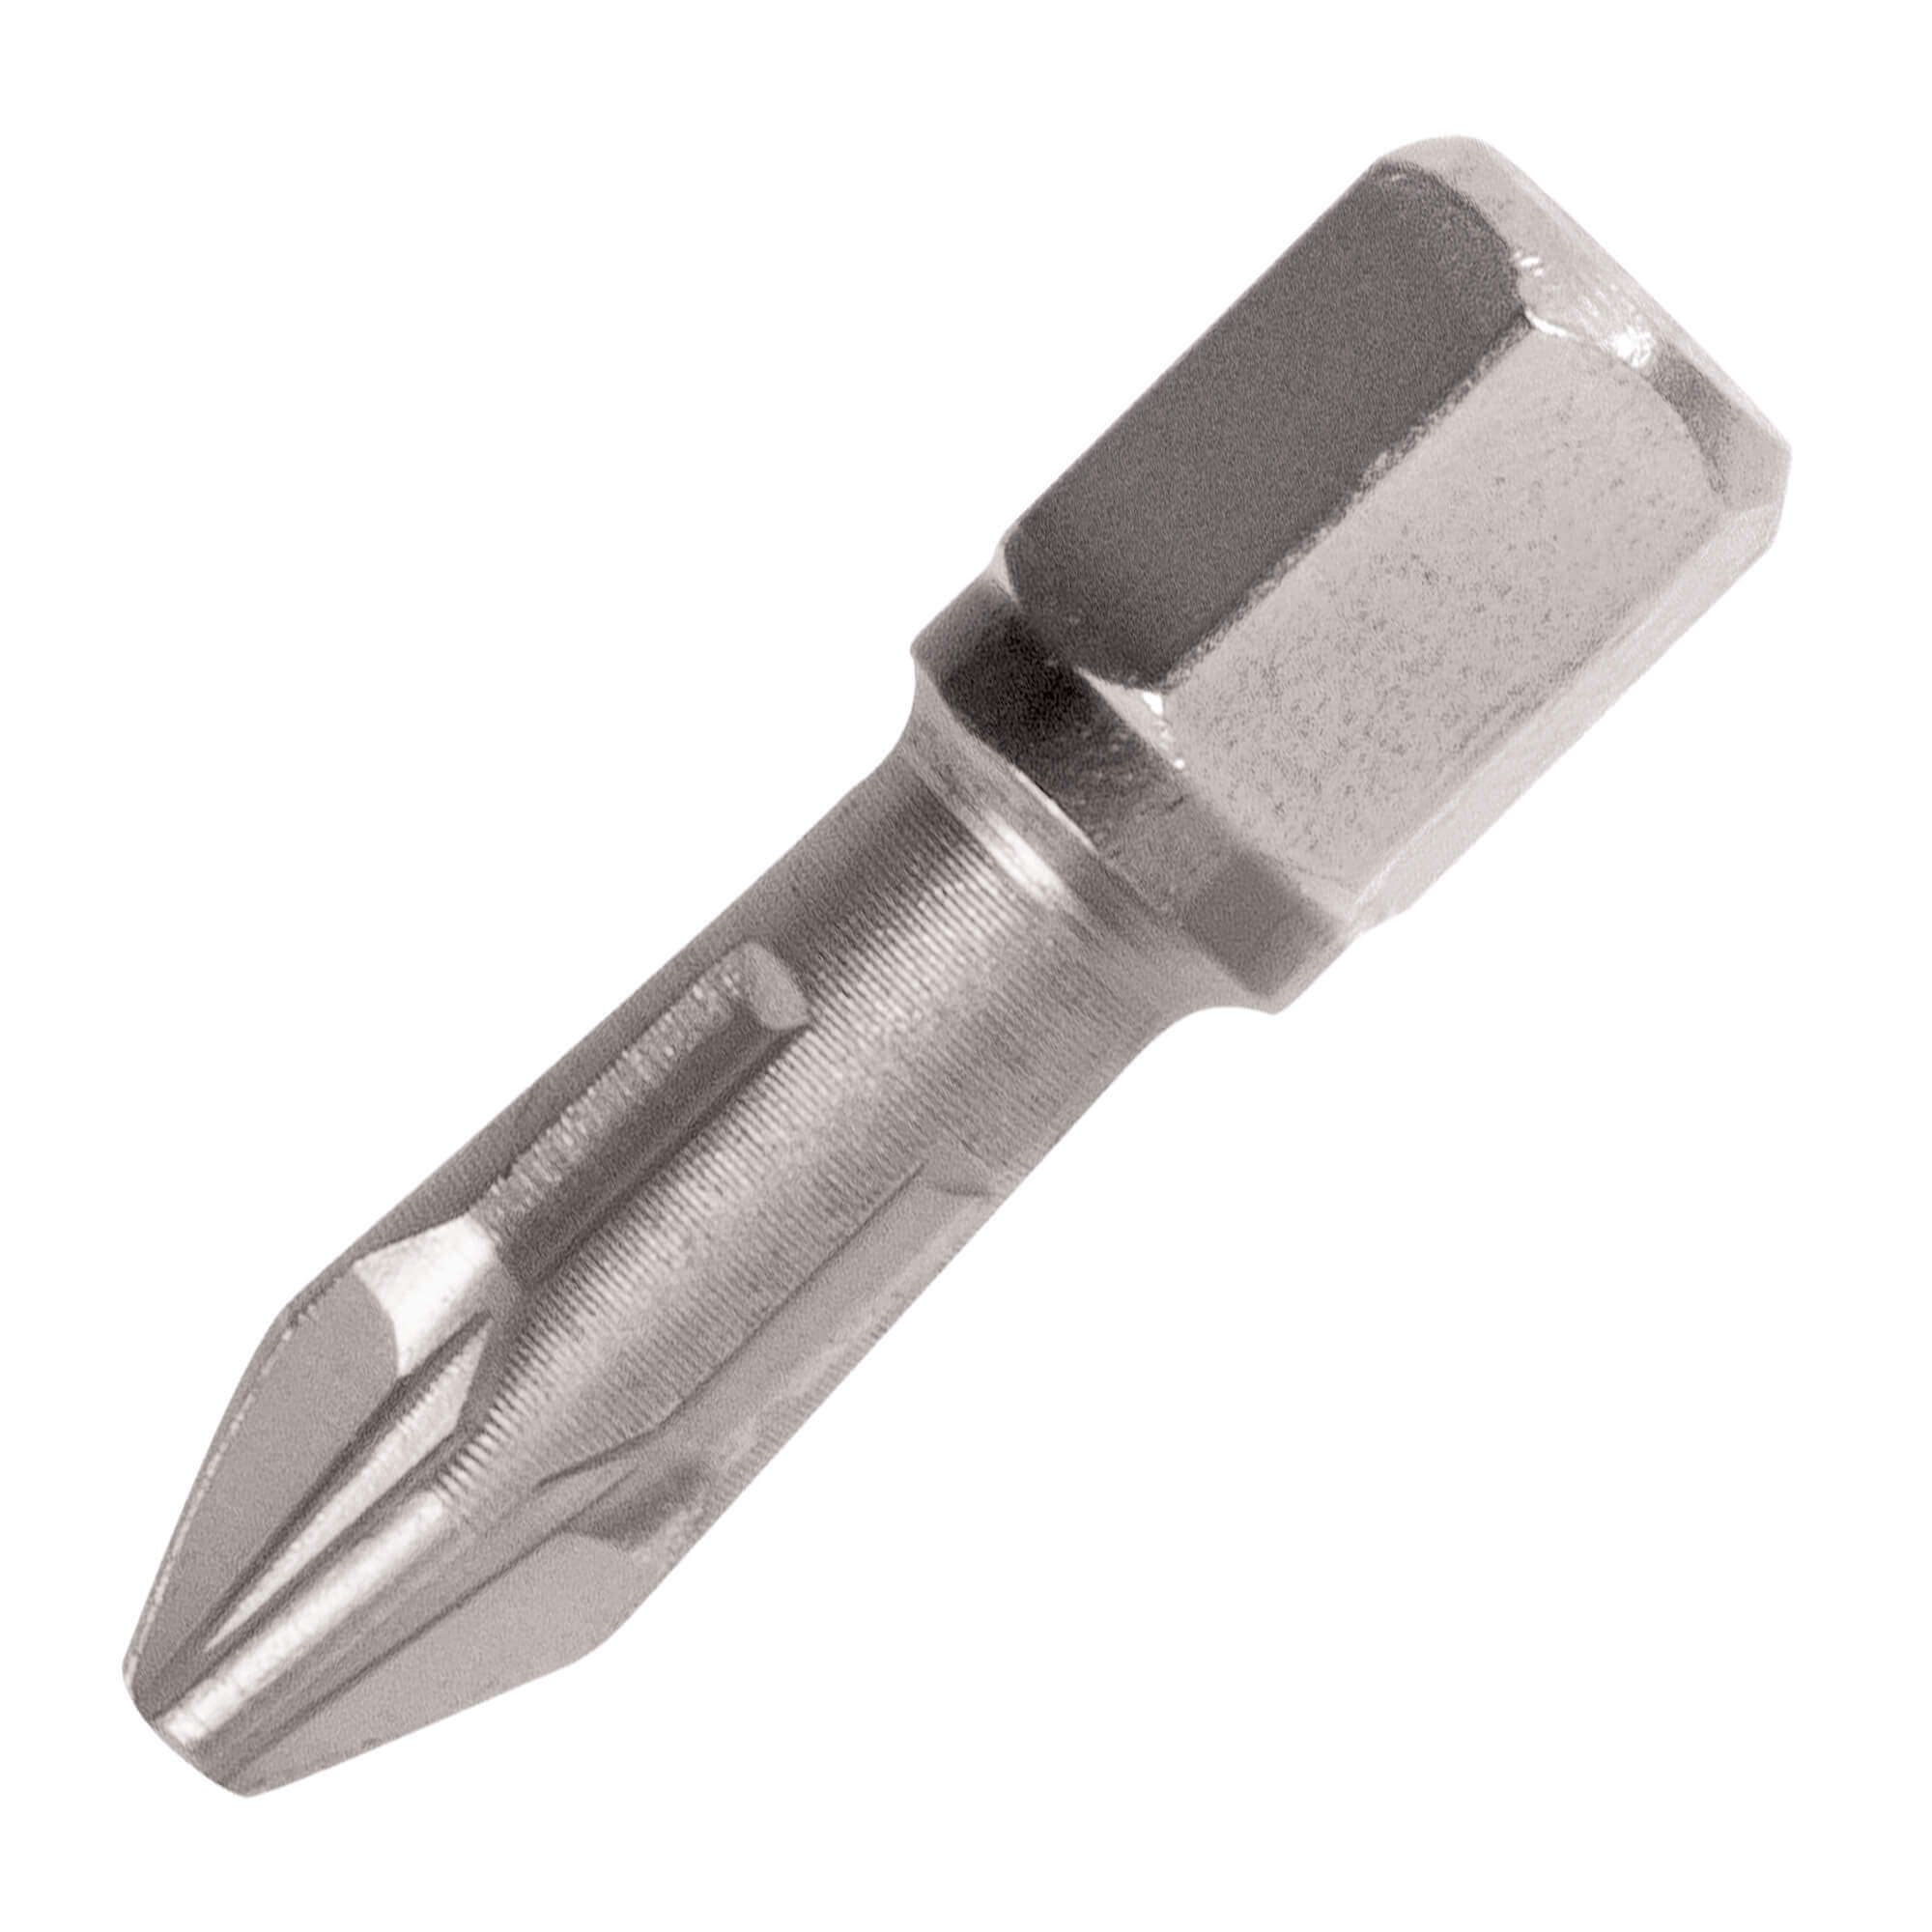 Image of Trend Snappy Tin Coated Pozi Screwdriver Bits PZ0 25mm Pack of 3